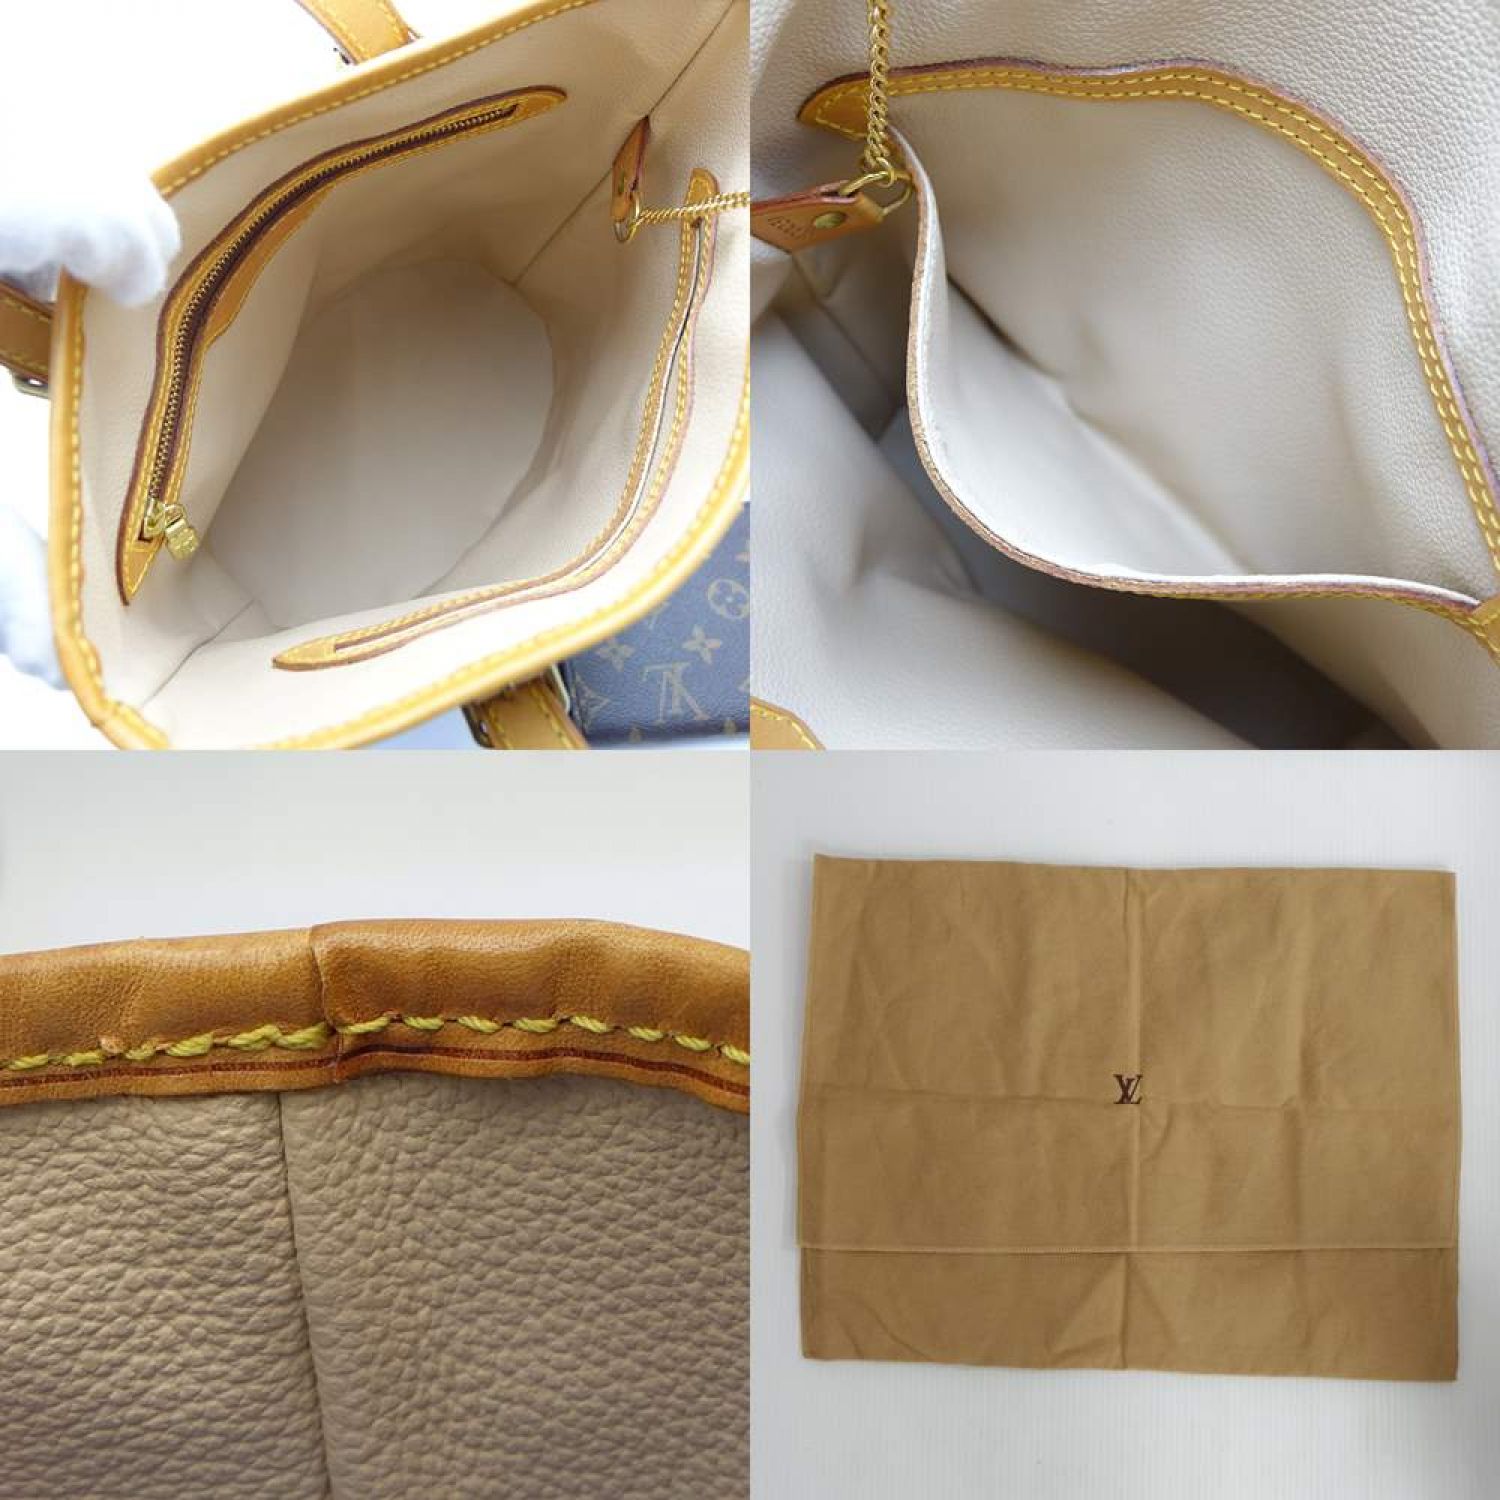 ◇◇LOUIS VUITTON ルイヴィトン プチバケット 布袋付 M42238